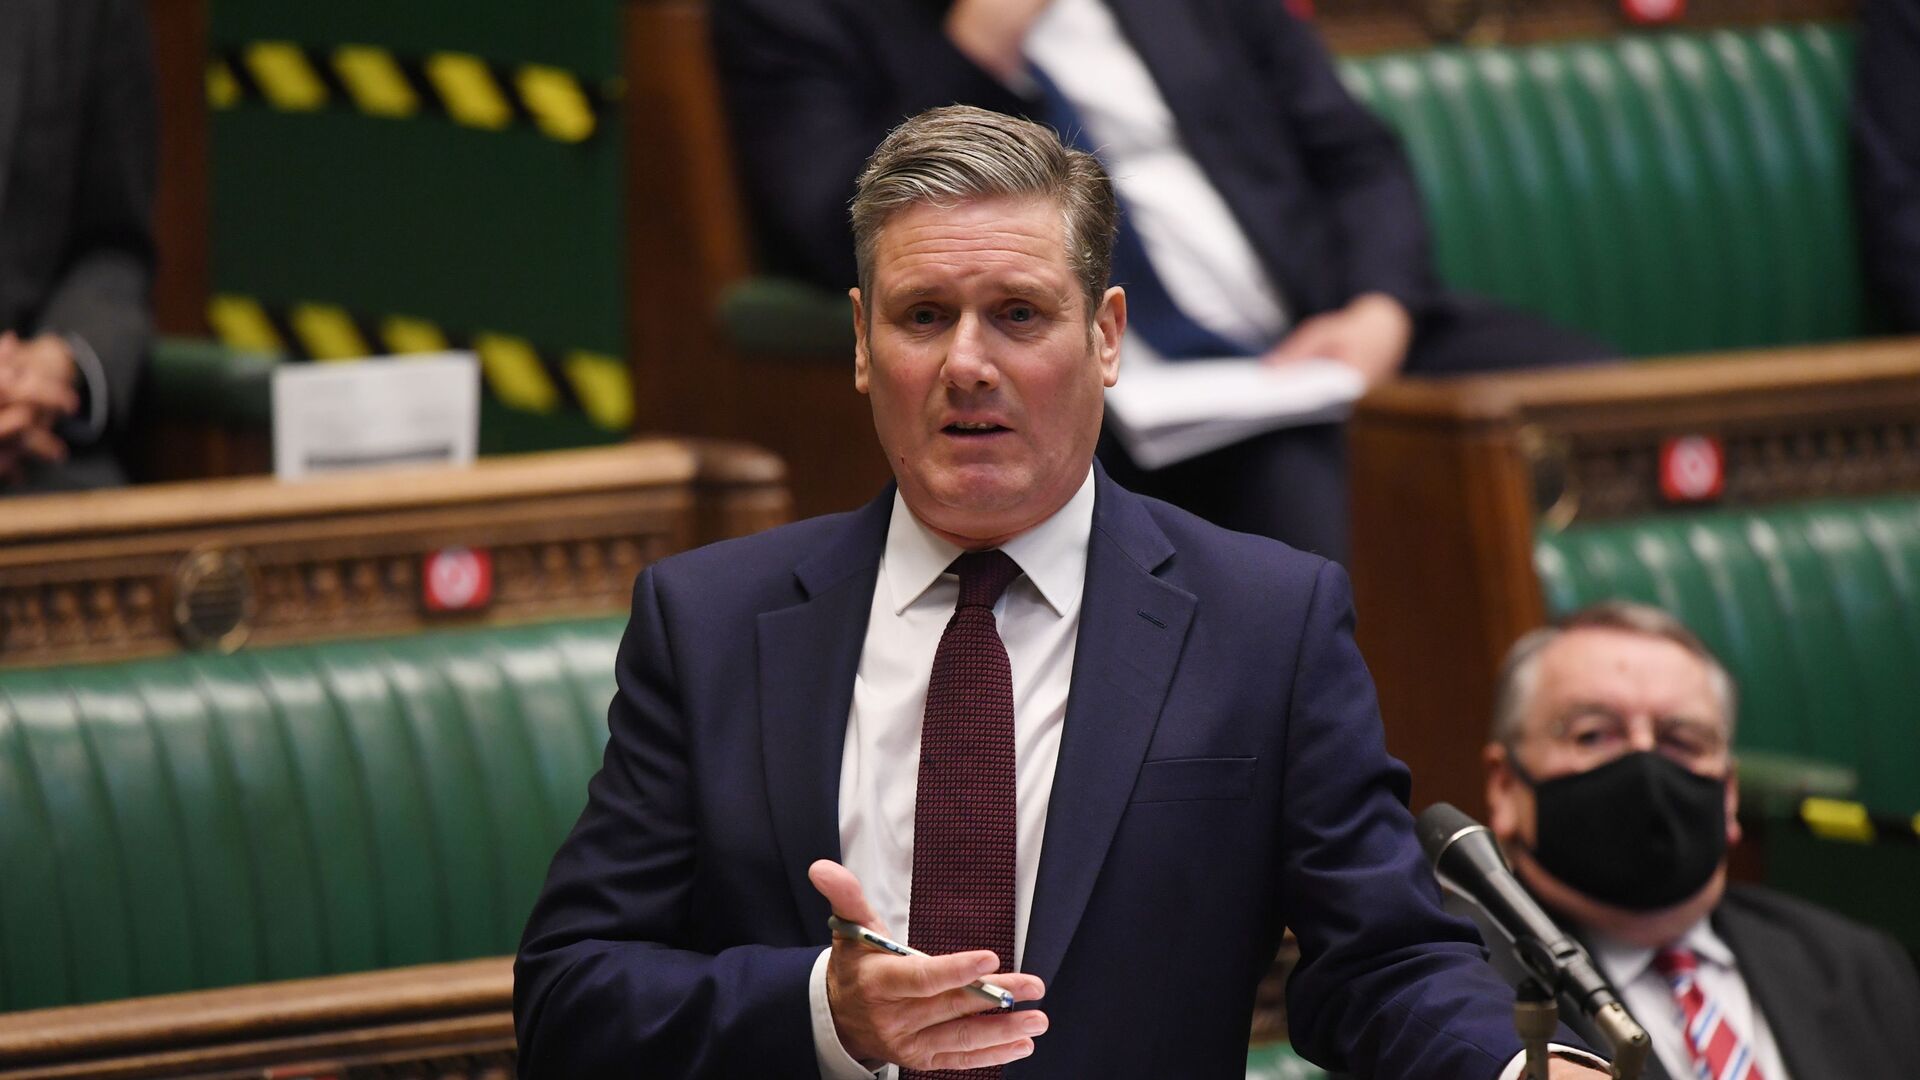 Britain's Labour Party leader, Keir Starmer speaks during a session in Parliament, in London - Sputnik International, 1920, 27.06.2021